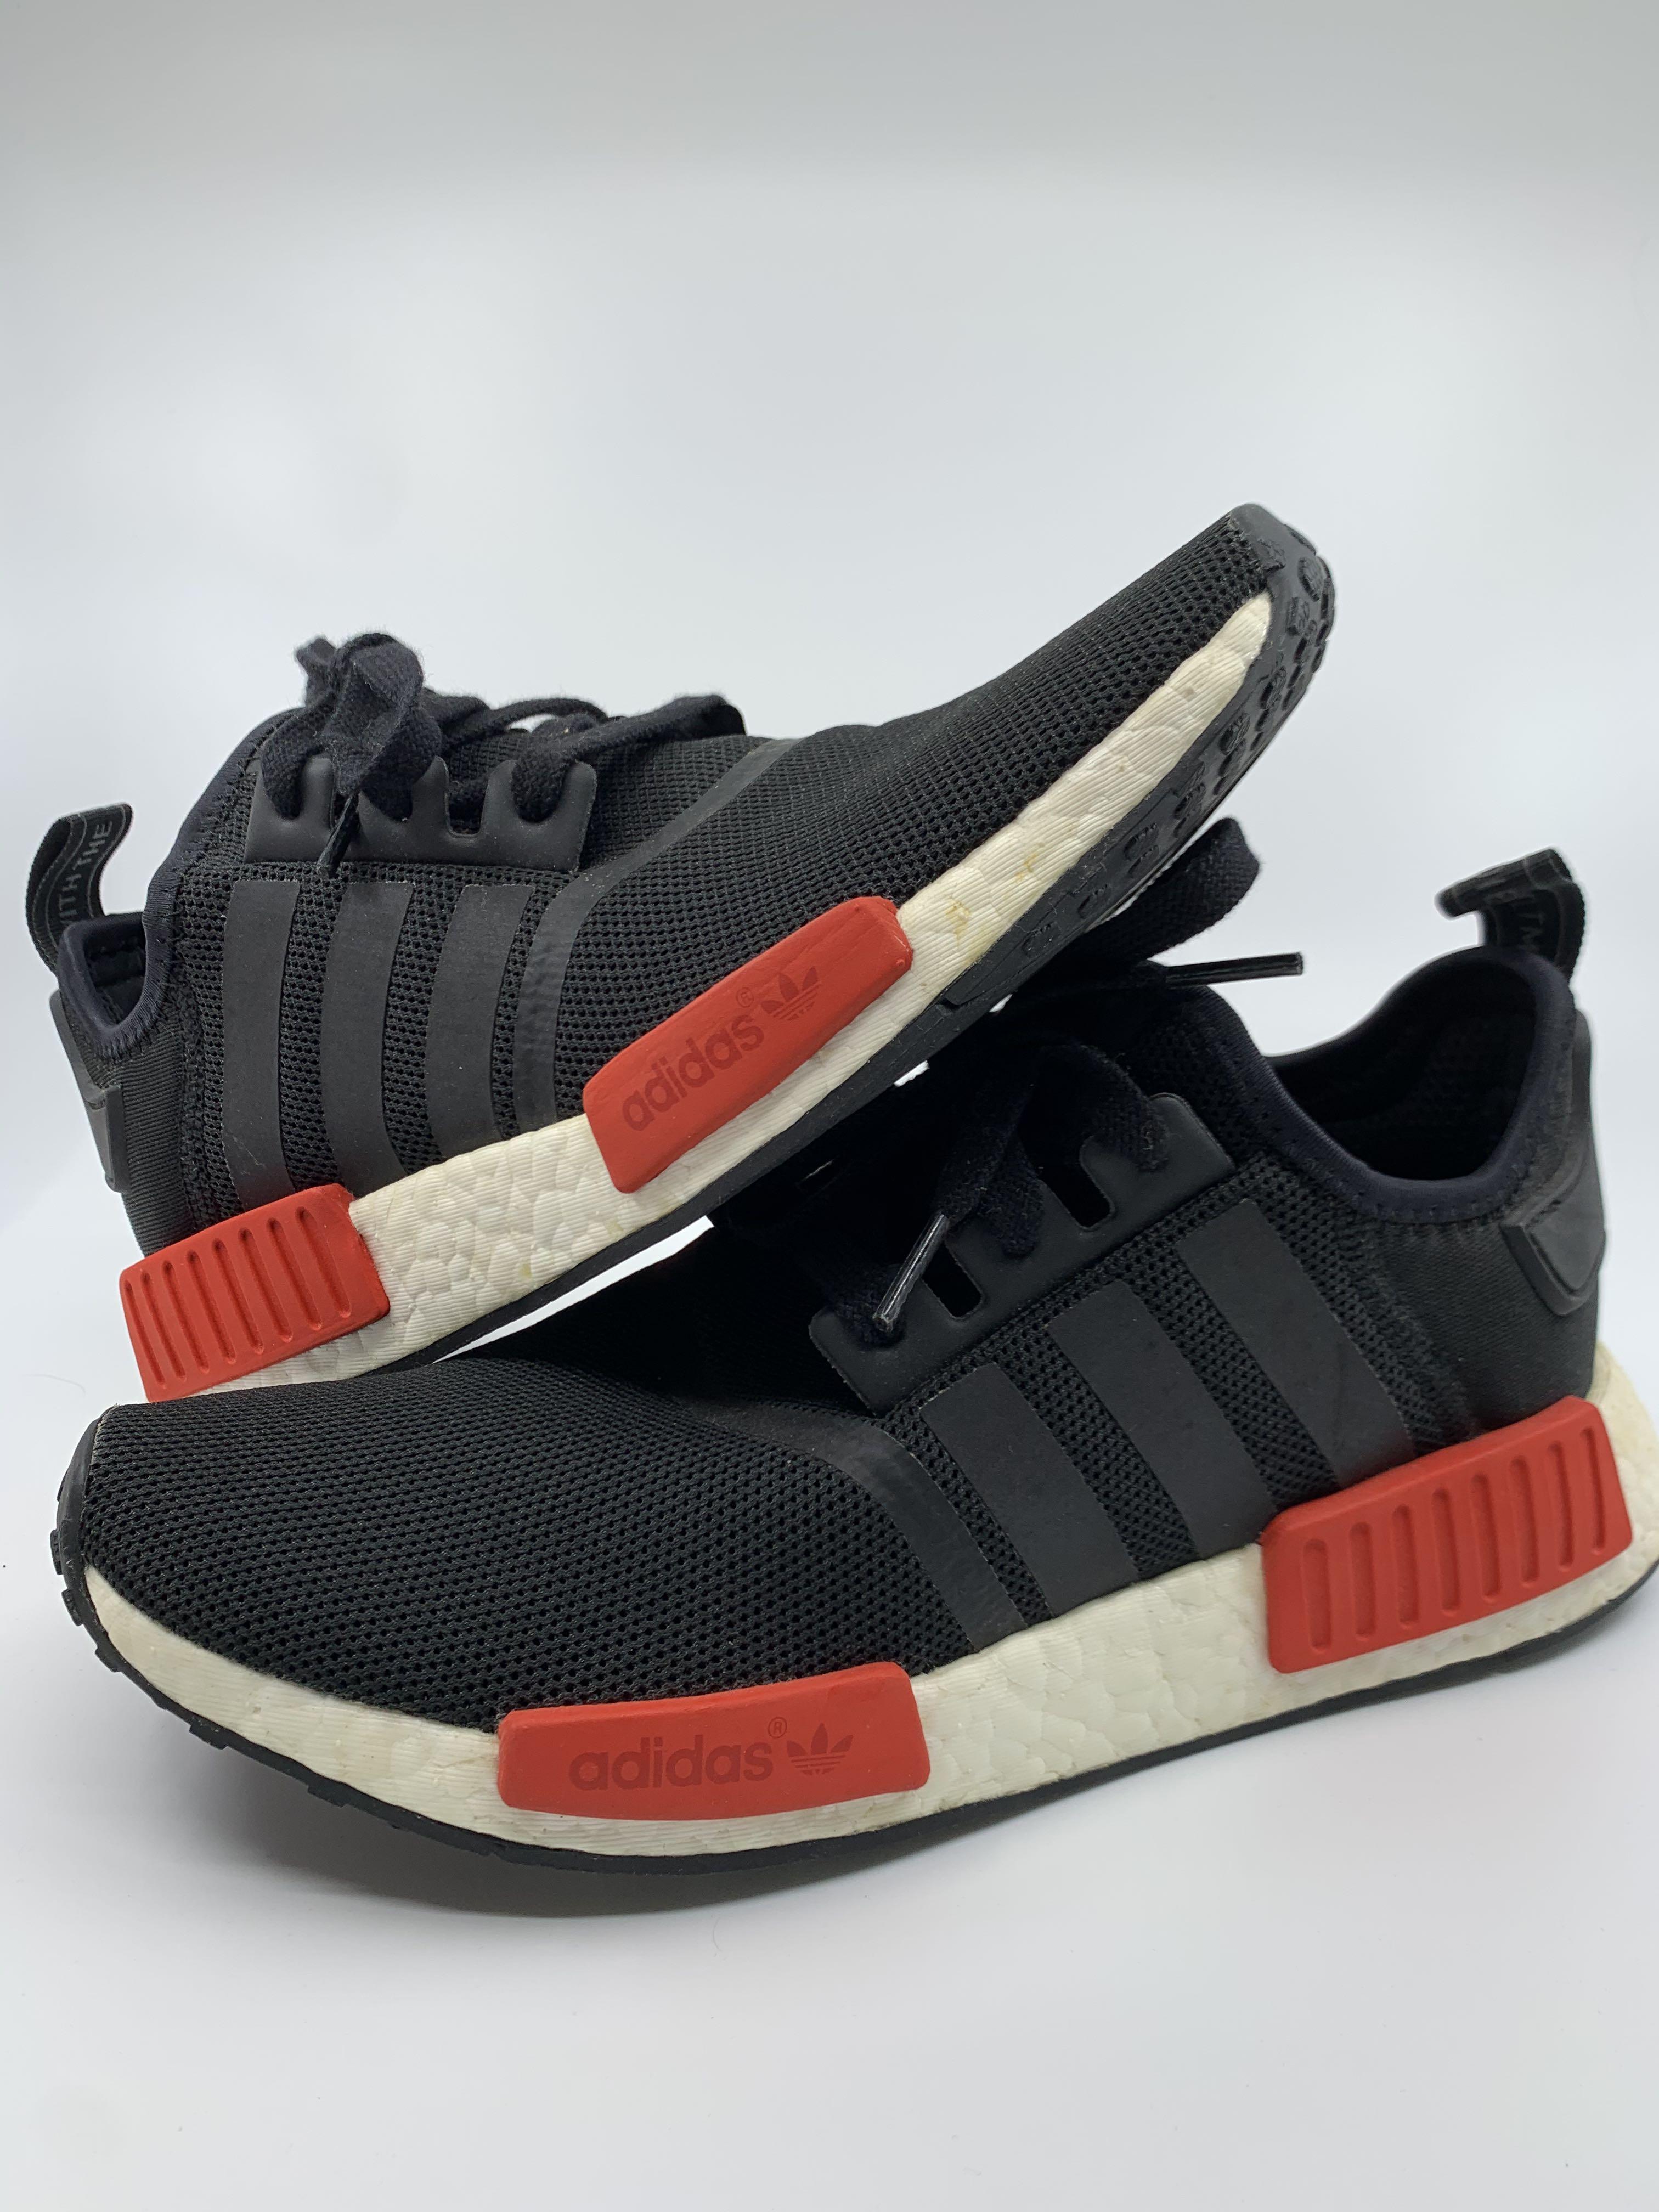 Adidas NMD R1 Black Red Boost The Brand 